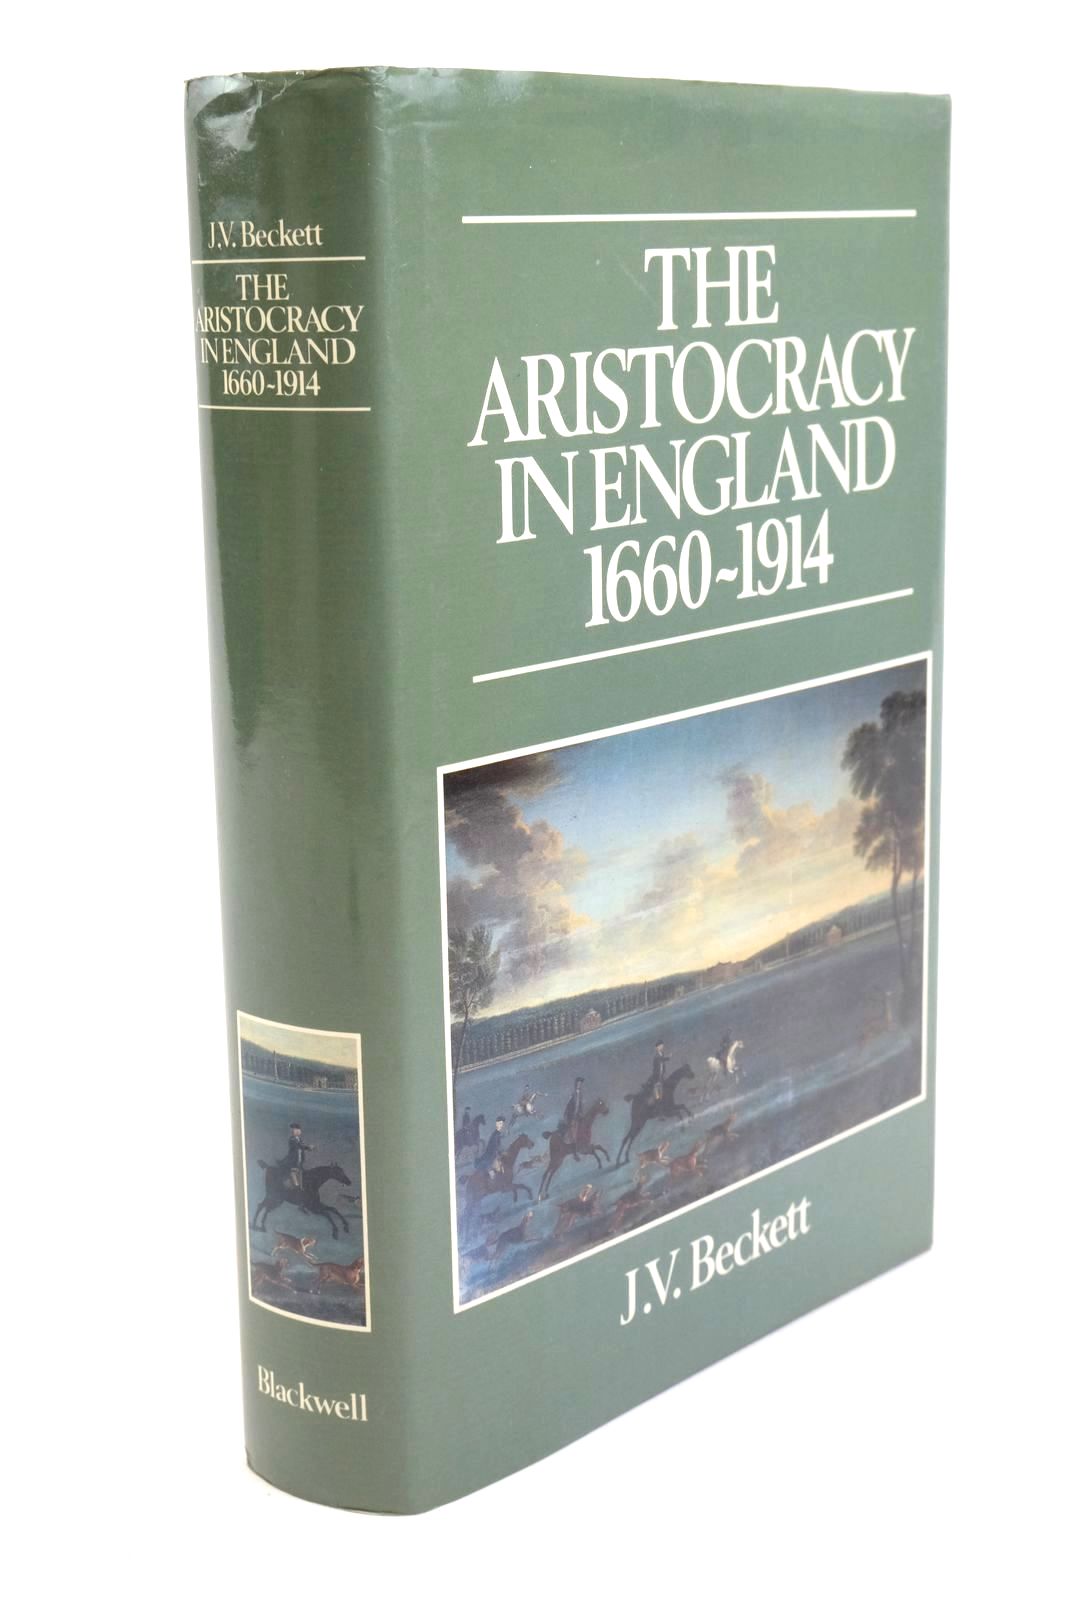 Photo of THE ARISTOCRACY IN ENGLAND 1660-1914 written by Beckett, J.V. published by Basil Blackwell (STOCK CODE: 1322415)  for sale by Stella & Rose's Books